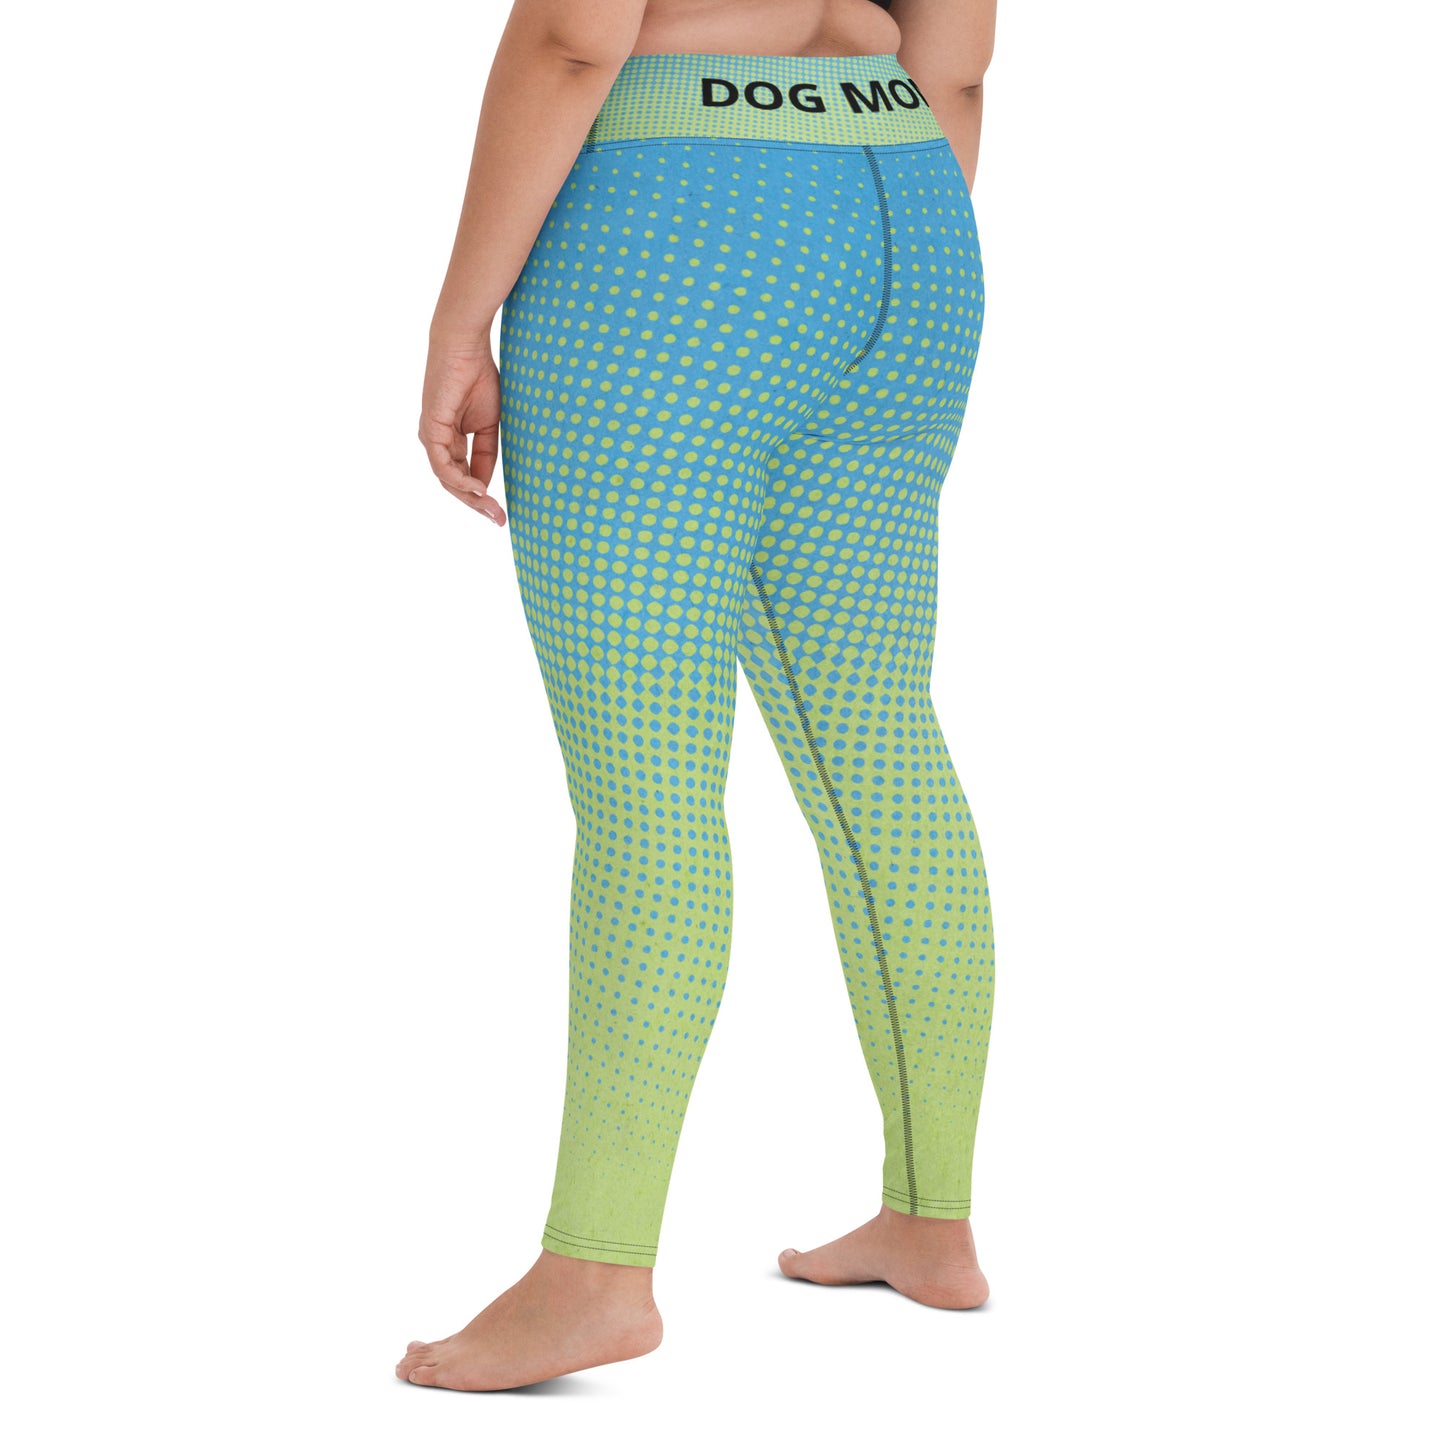 The back of a woman wearing Sweetest Paw's Yoga Leggings Multi in blue and green polka dot.